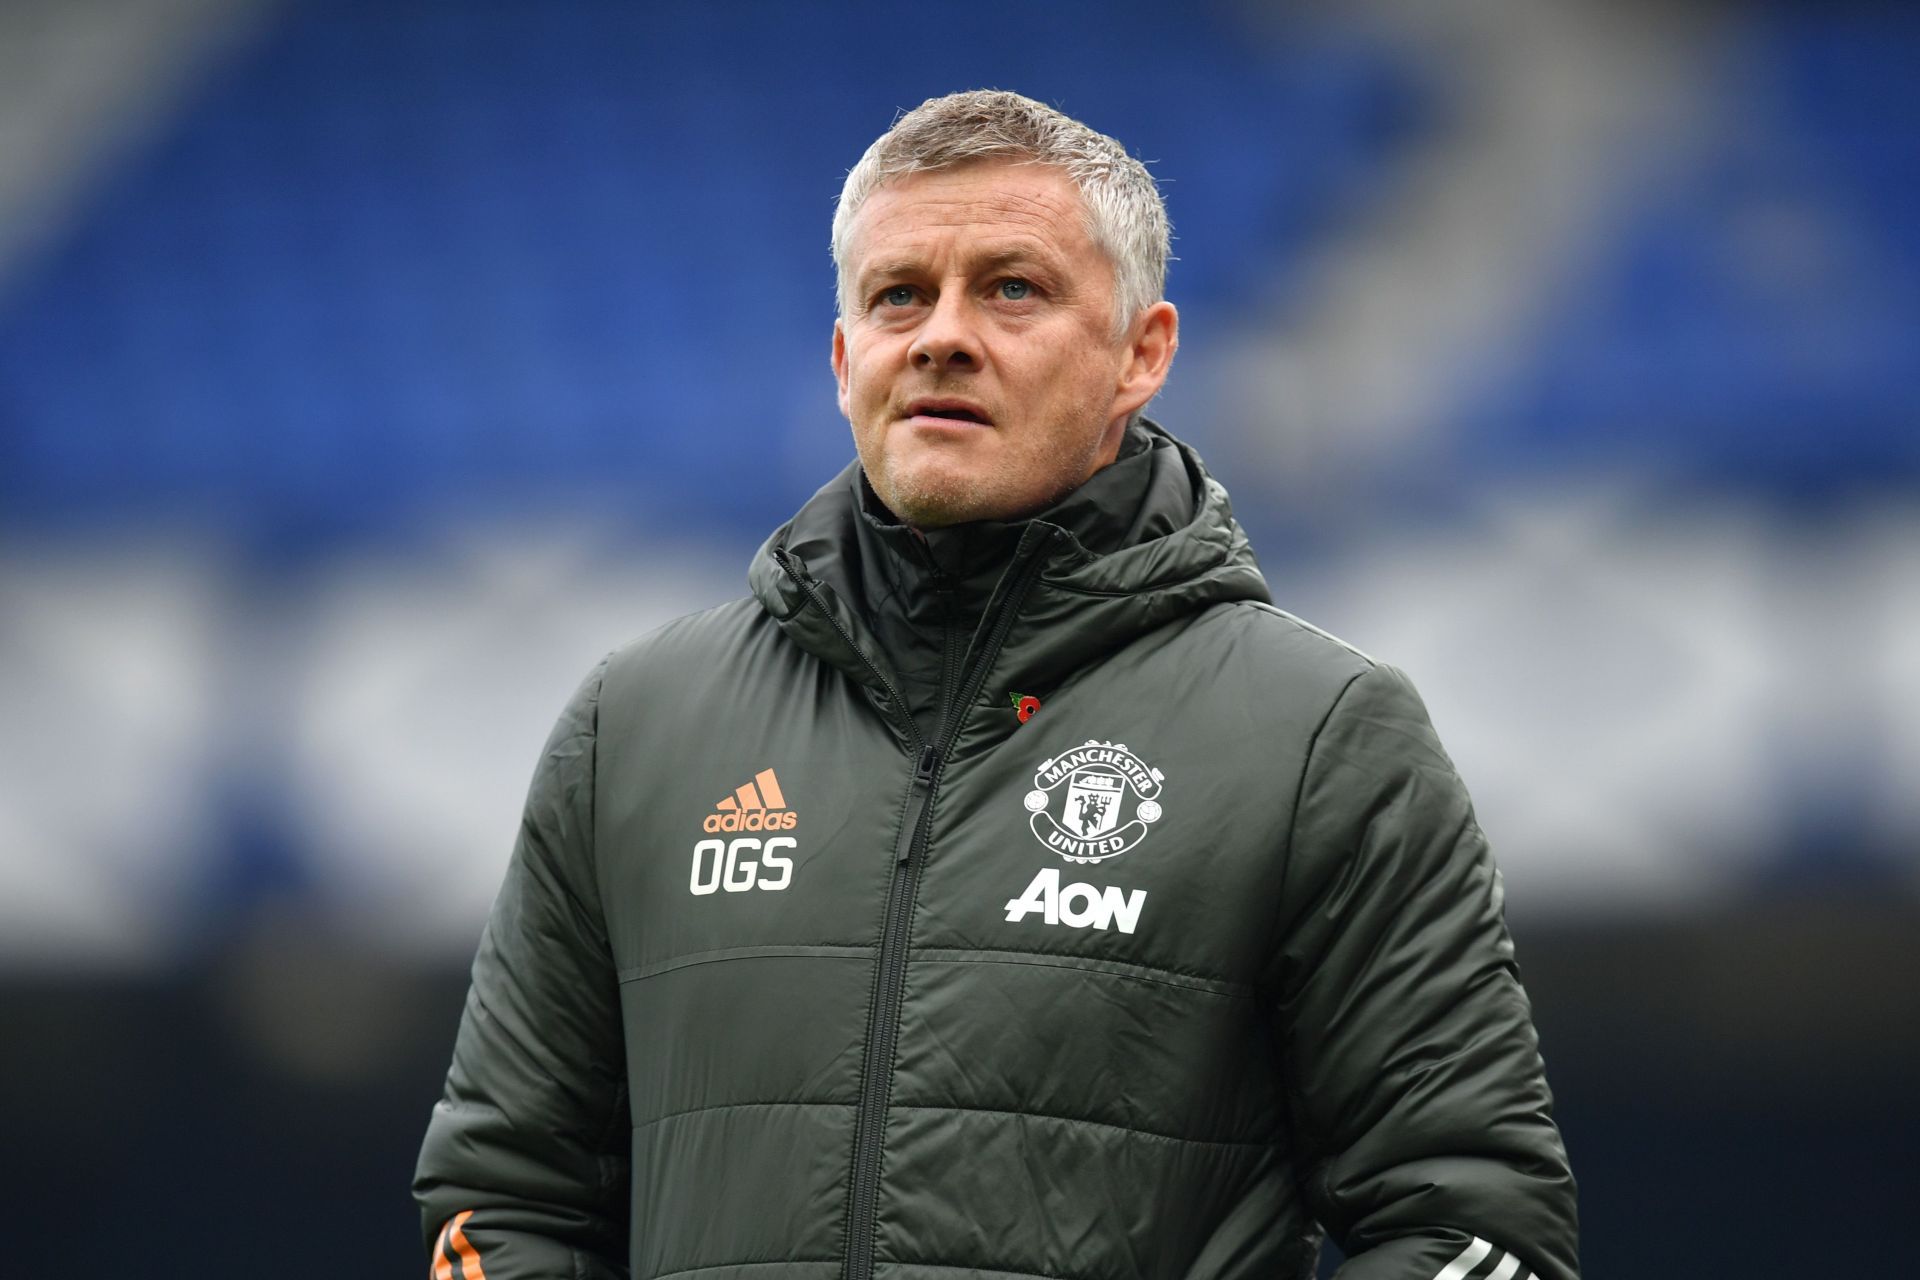 Manchester United manager Ole Gunnar Solskjaer. (Photo by Paul Ellis - Pool/Getty Images)